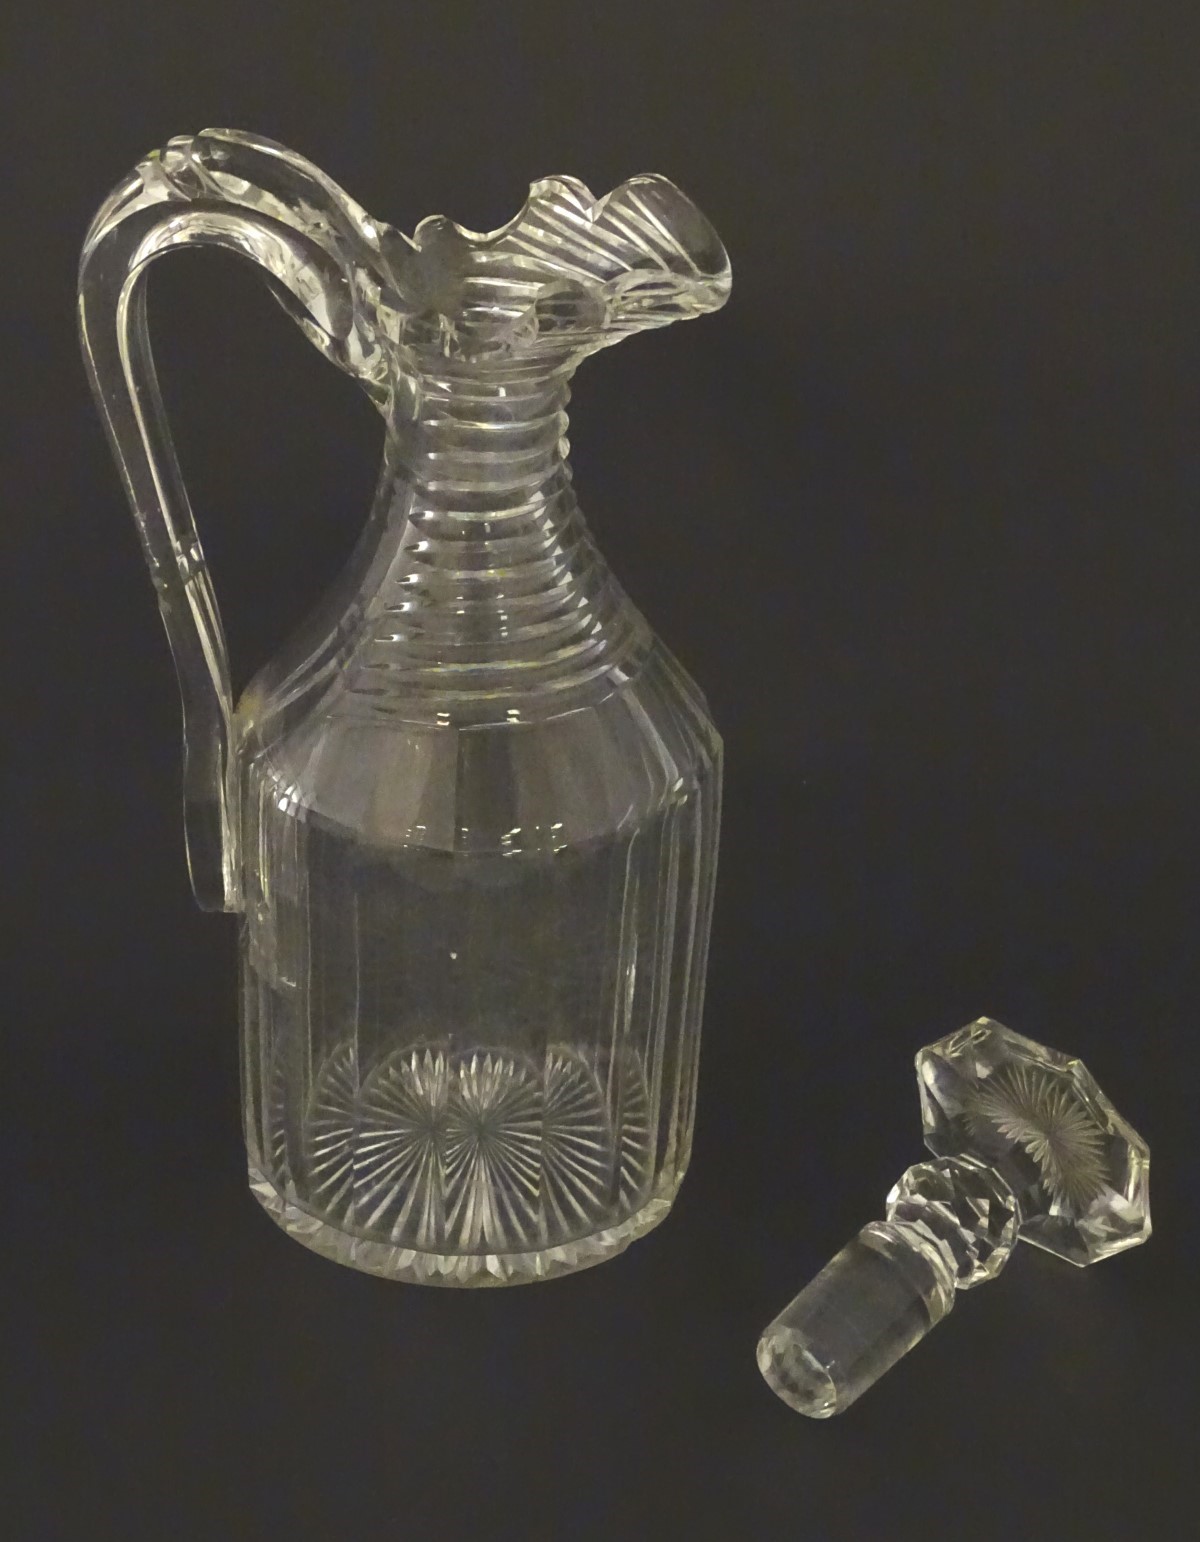 A 19thC Irish cut glass decanter and stopper, having a panelled body with ribbed neck, - Image 4 of 6